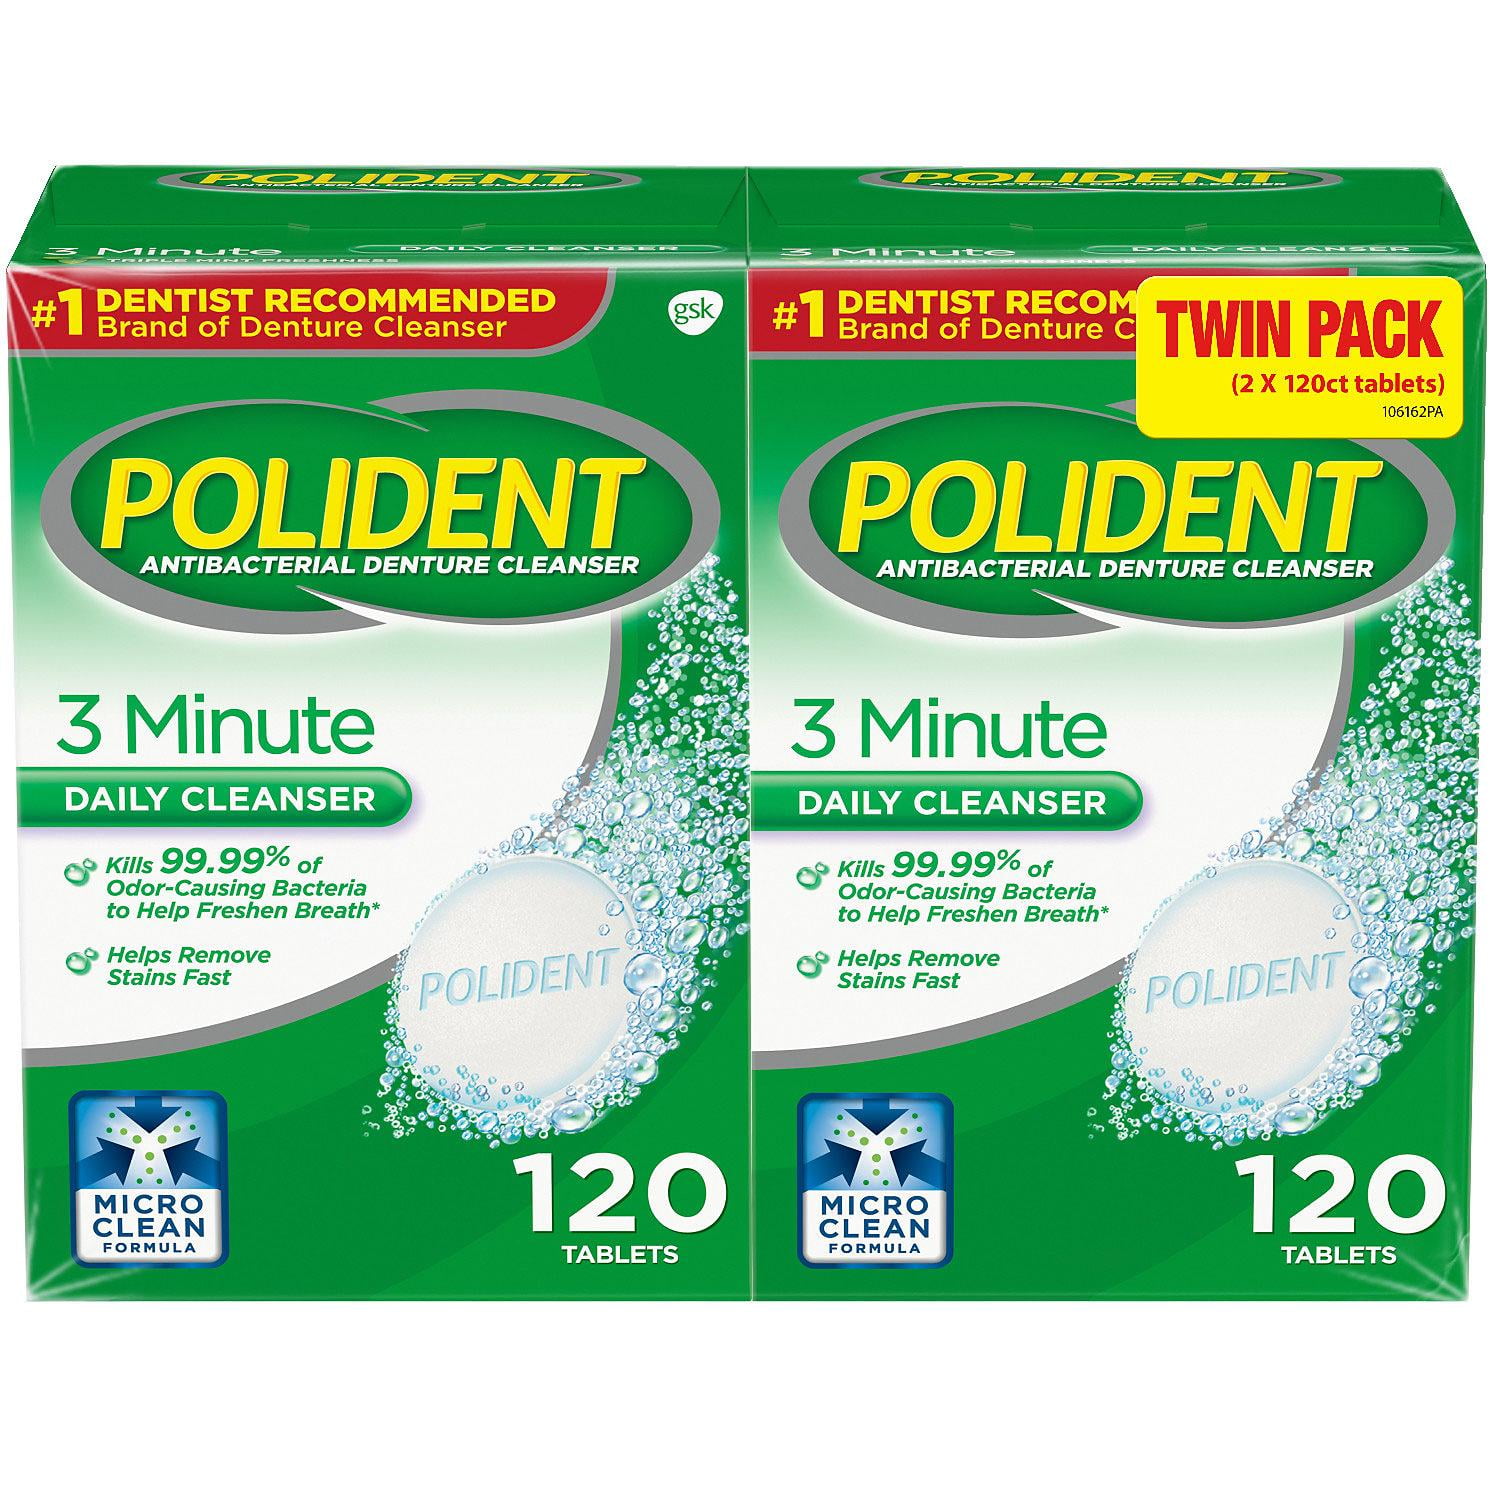 Polident 3 Minute Antibacterial Denture Cleansers Tablets, 120 Count, 2 Pack